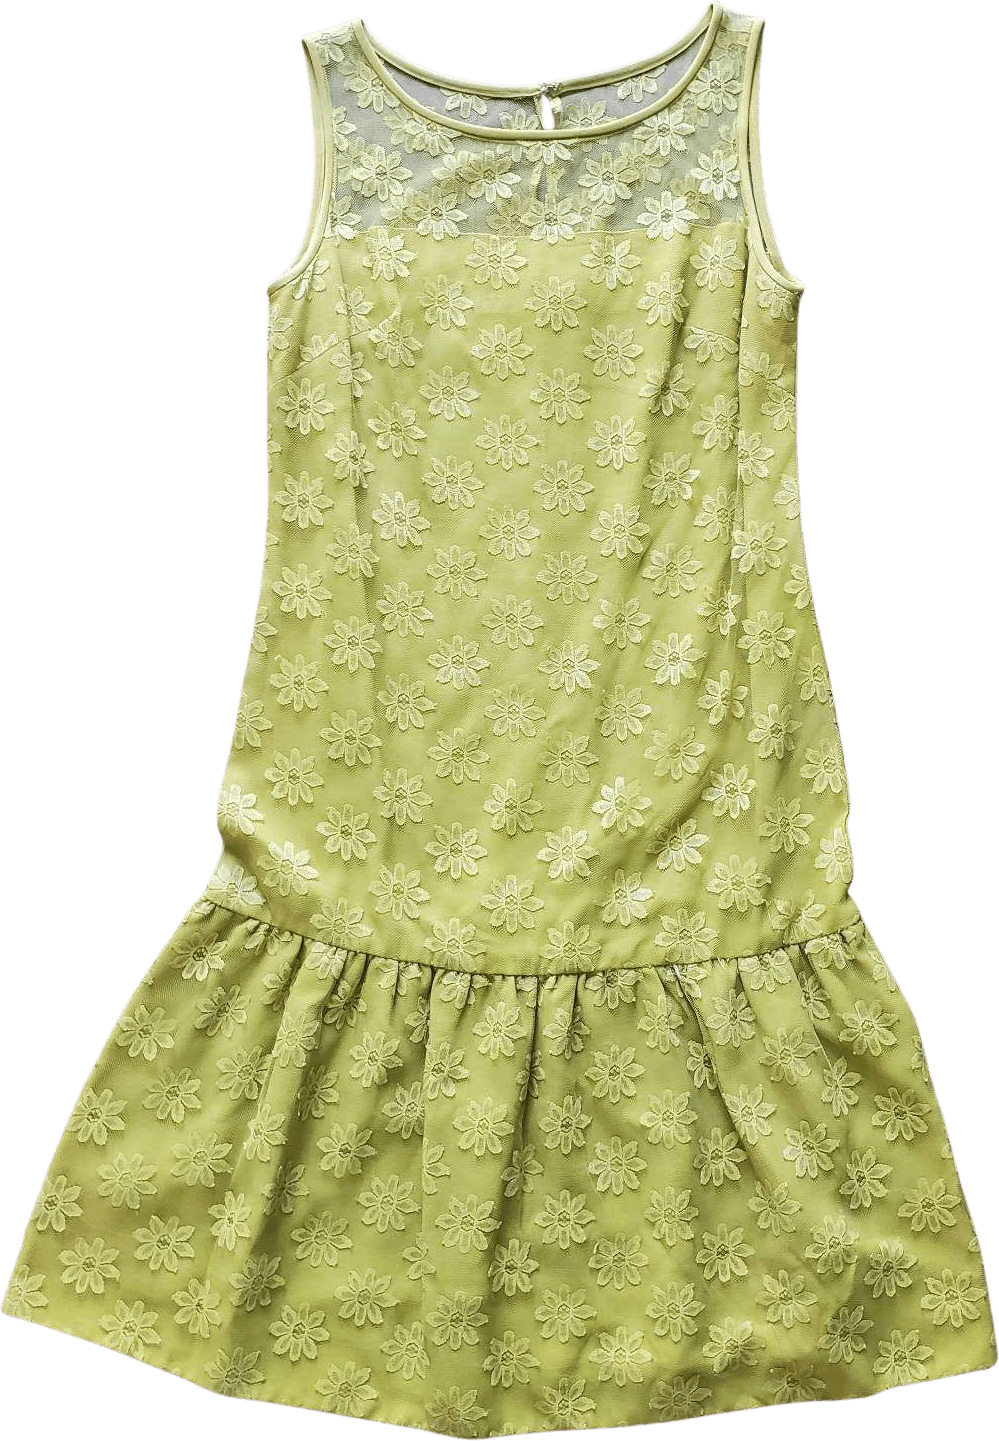 Vintage 50’s/60’s Green Lace Floral Print Drop Waist Dress by Tammy ...